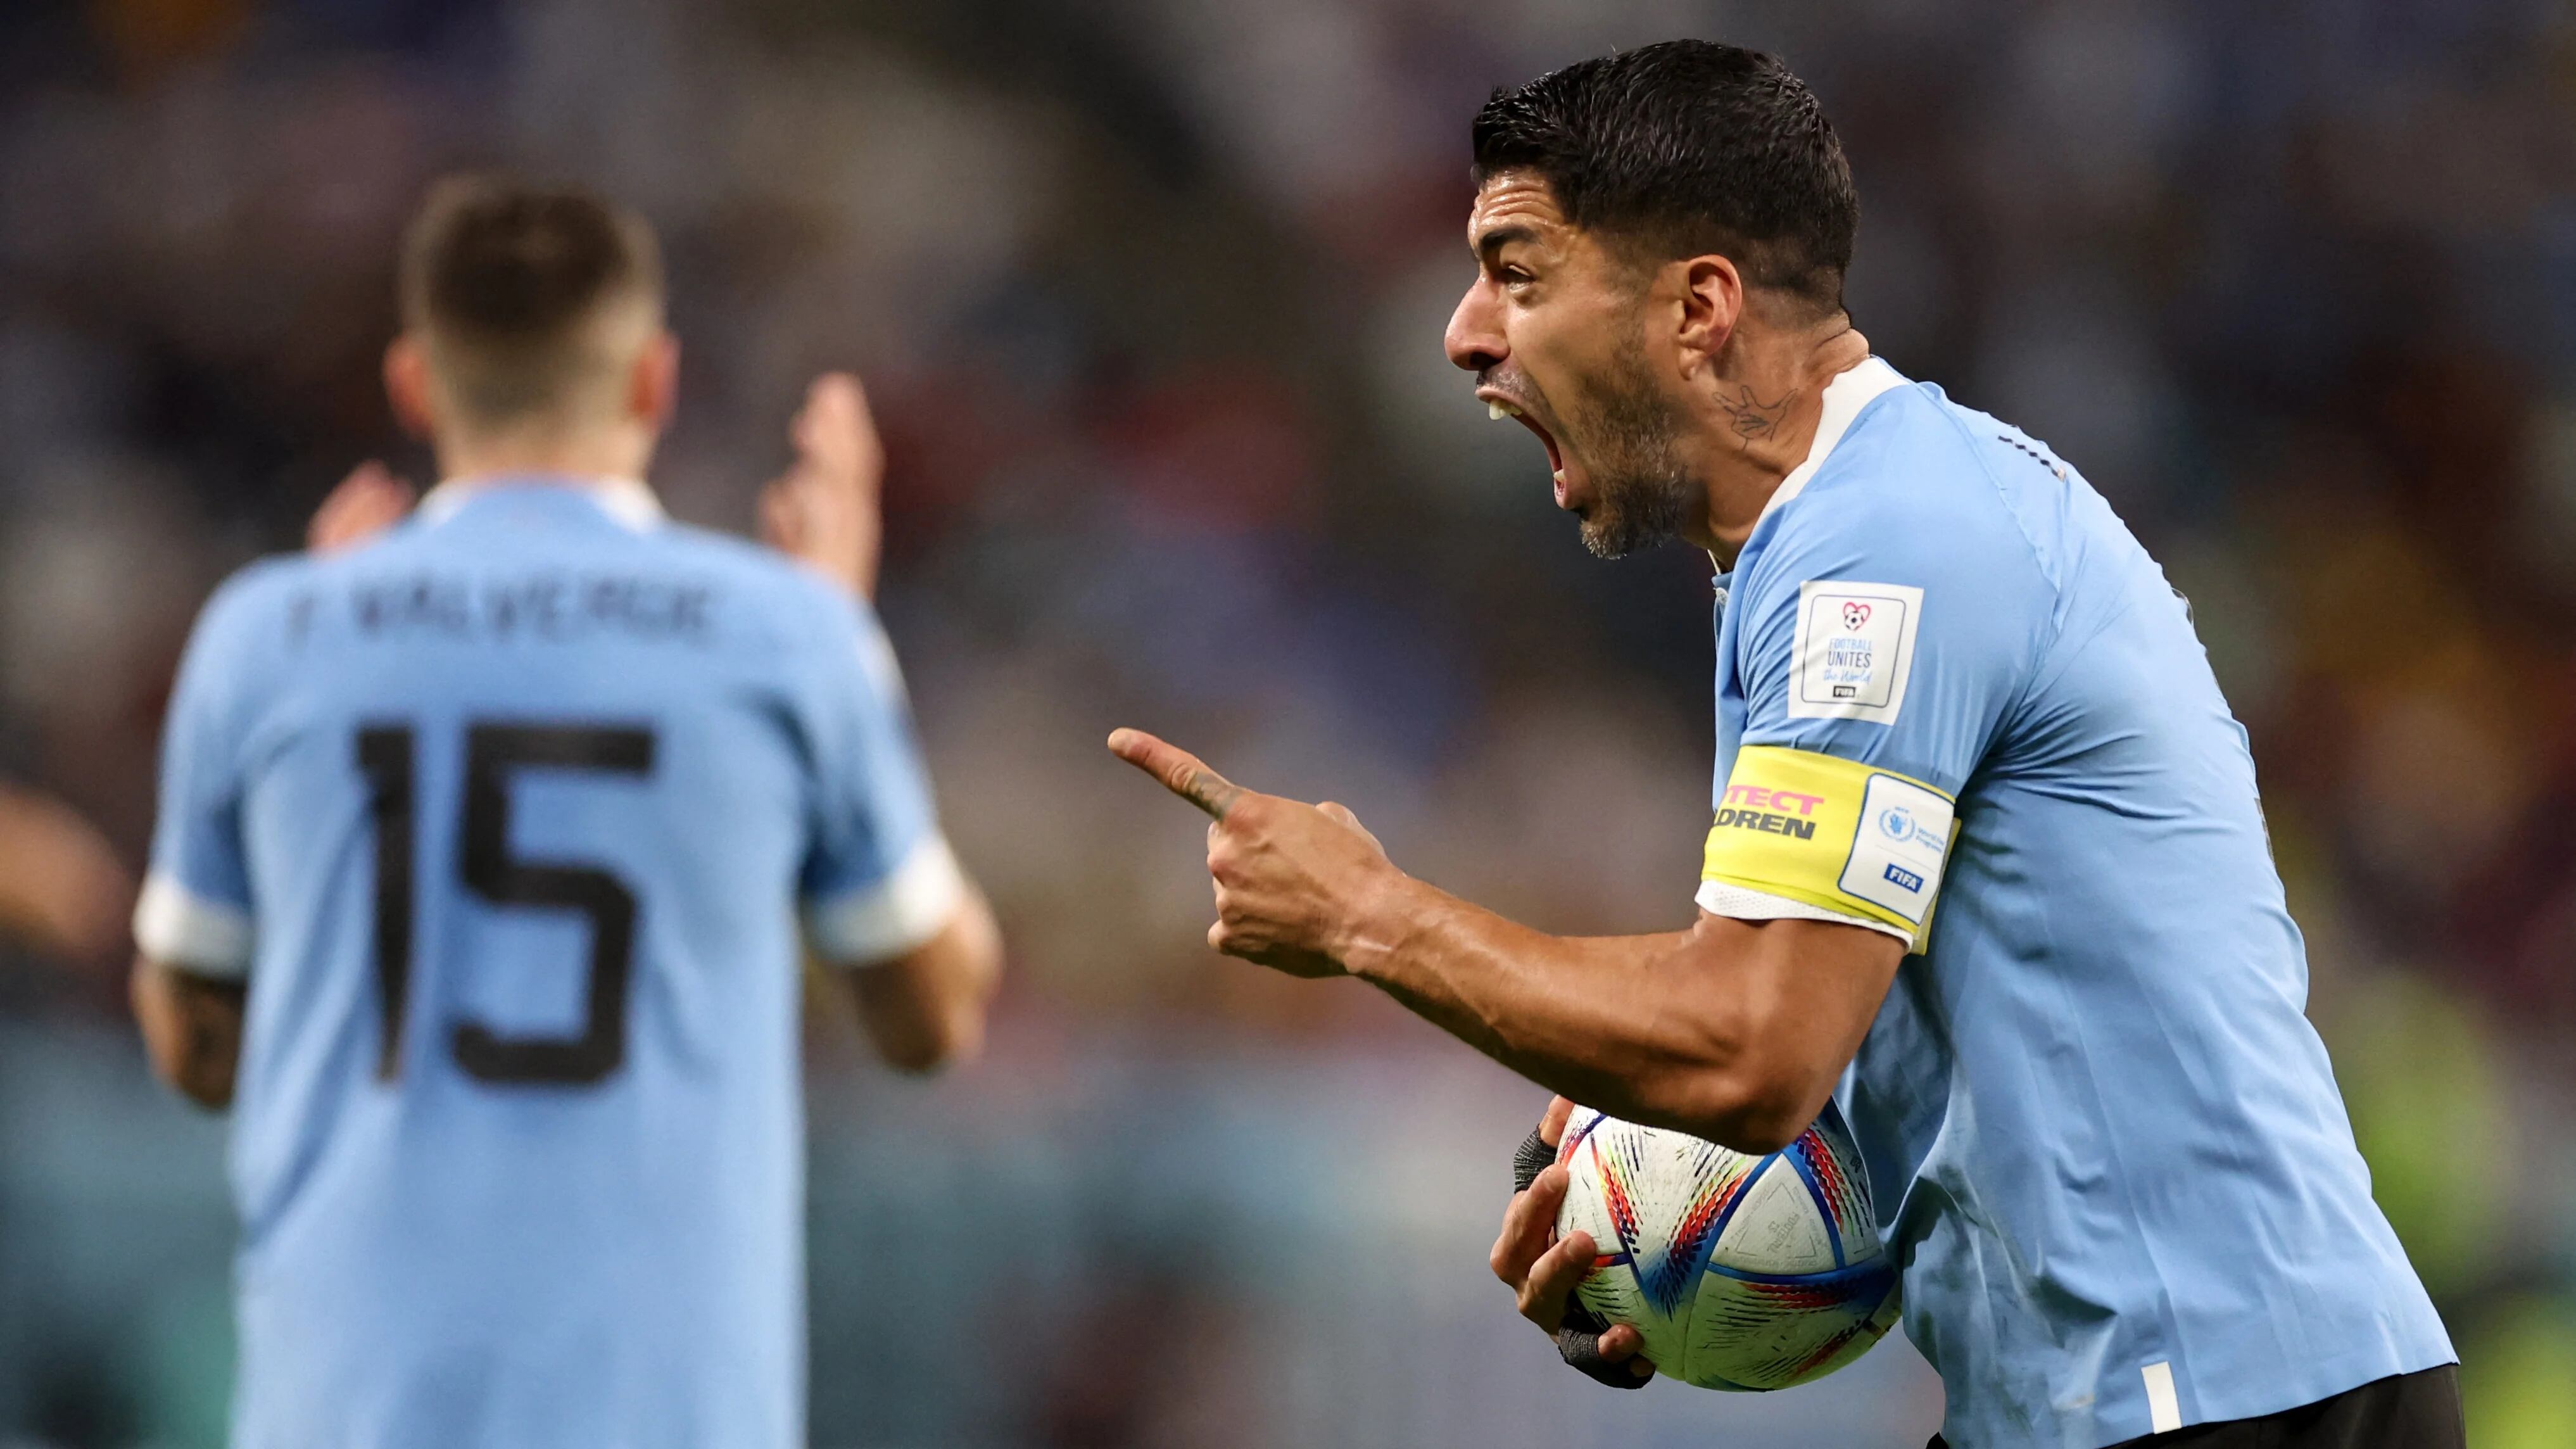 Luis Suárez would not be called up by Uruguay for dates 3 and 4 of the South American Qualifiers - credit Abdallah Dalsh/ REUTERS.